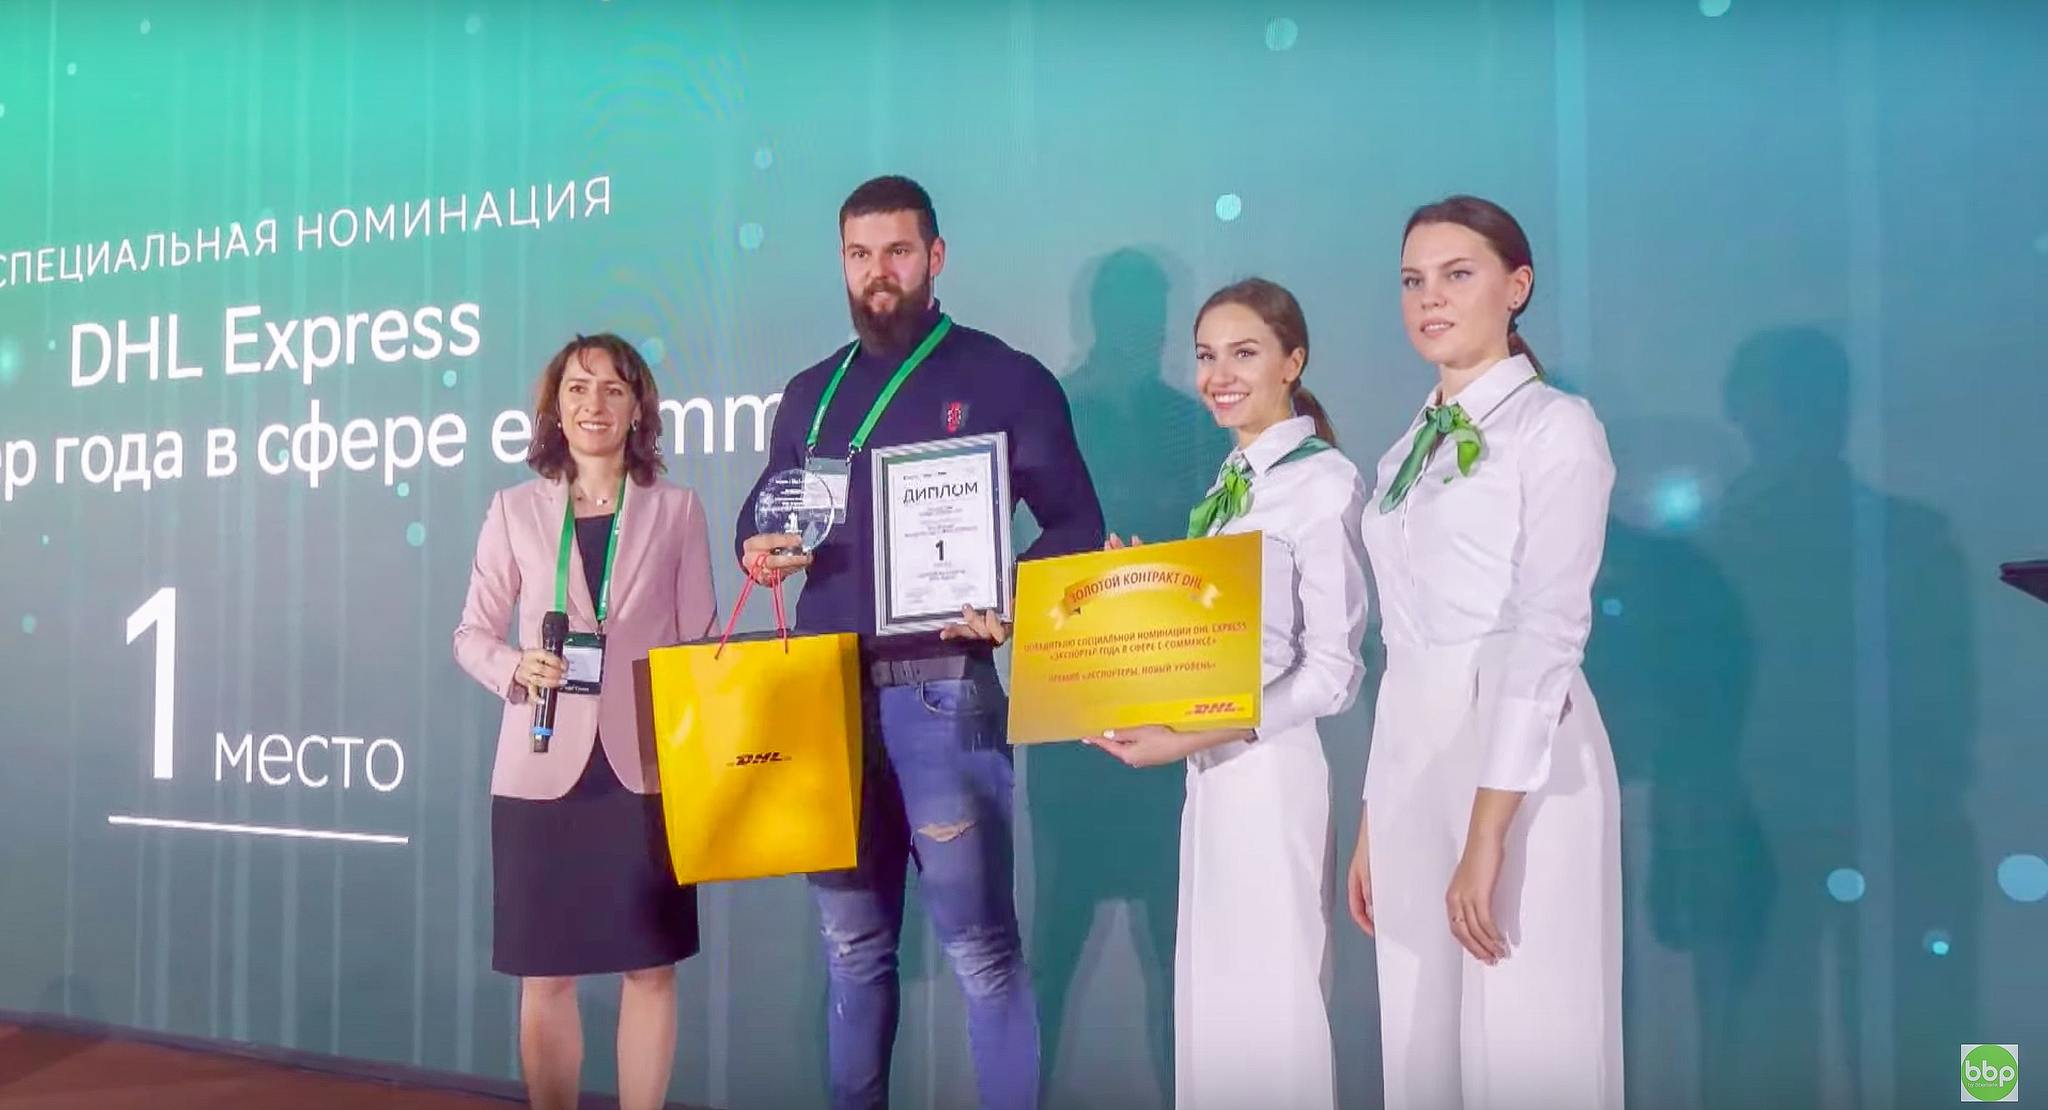 DHL and Sberbank awarded the best exporters 